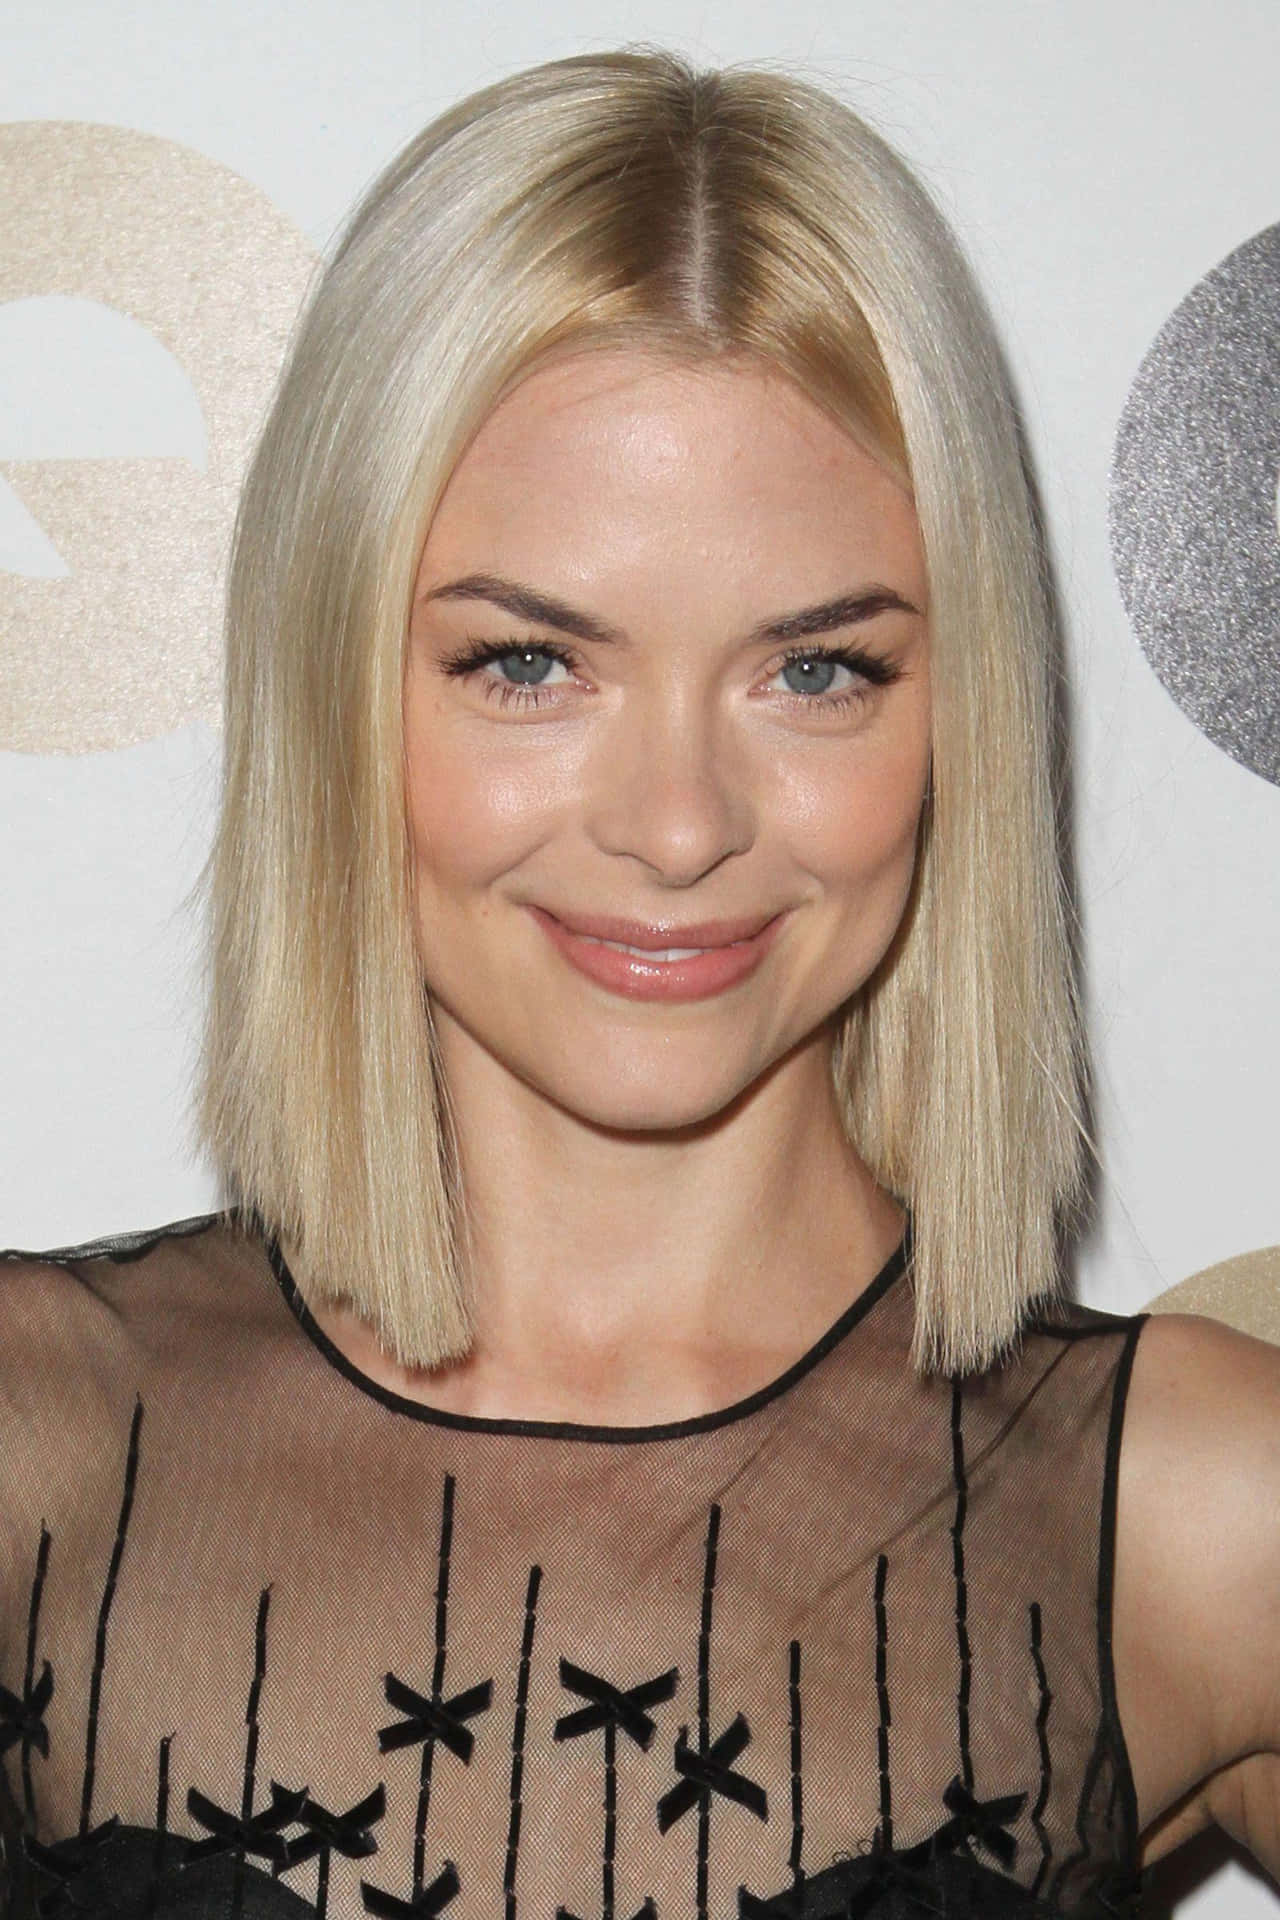 Actress Jaime King dazzling in a stylish outfit Wallpaper